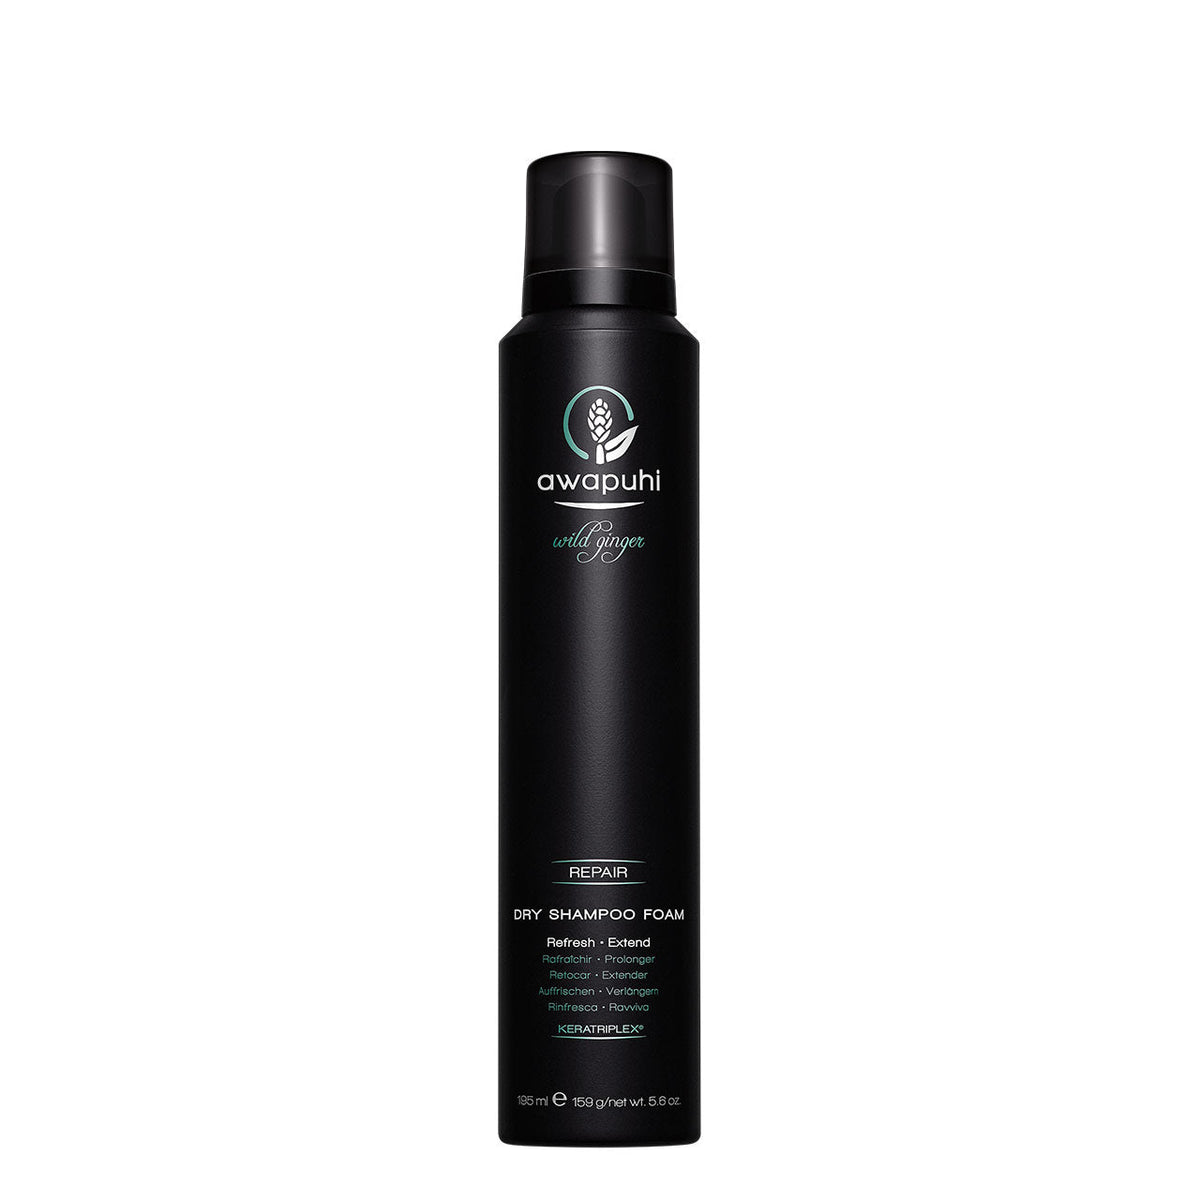 Awapuhi Wild Ginger Repair Dry Shampoo Foam - 195ML - by Paul Mitchell |ProCare Outlet|